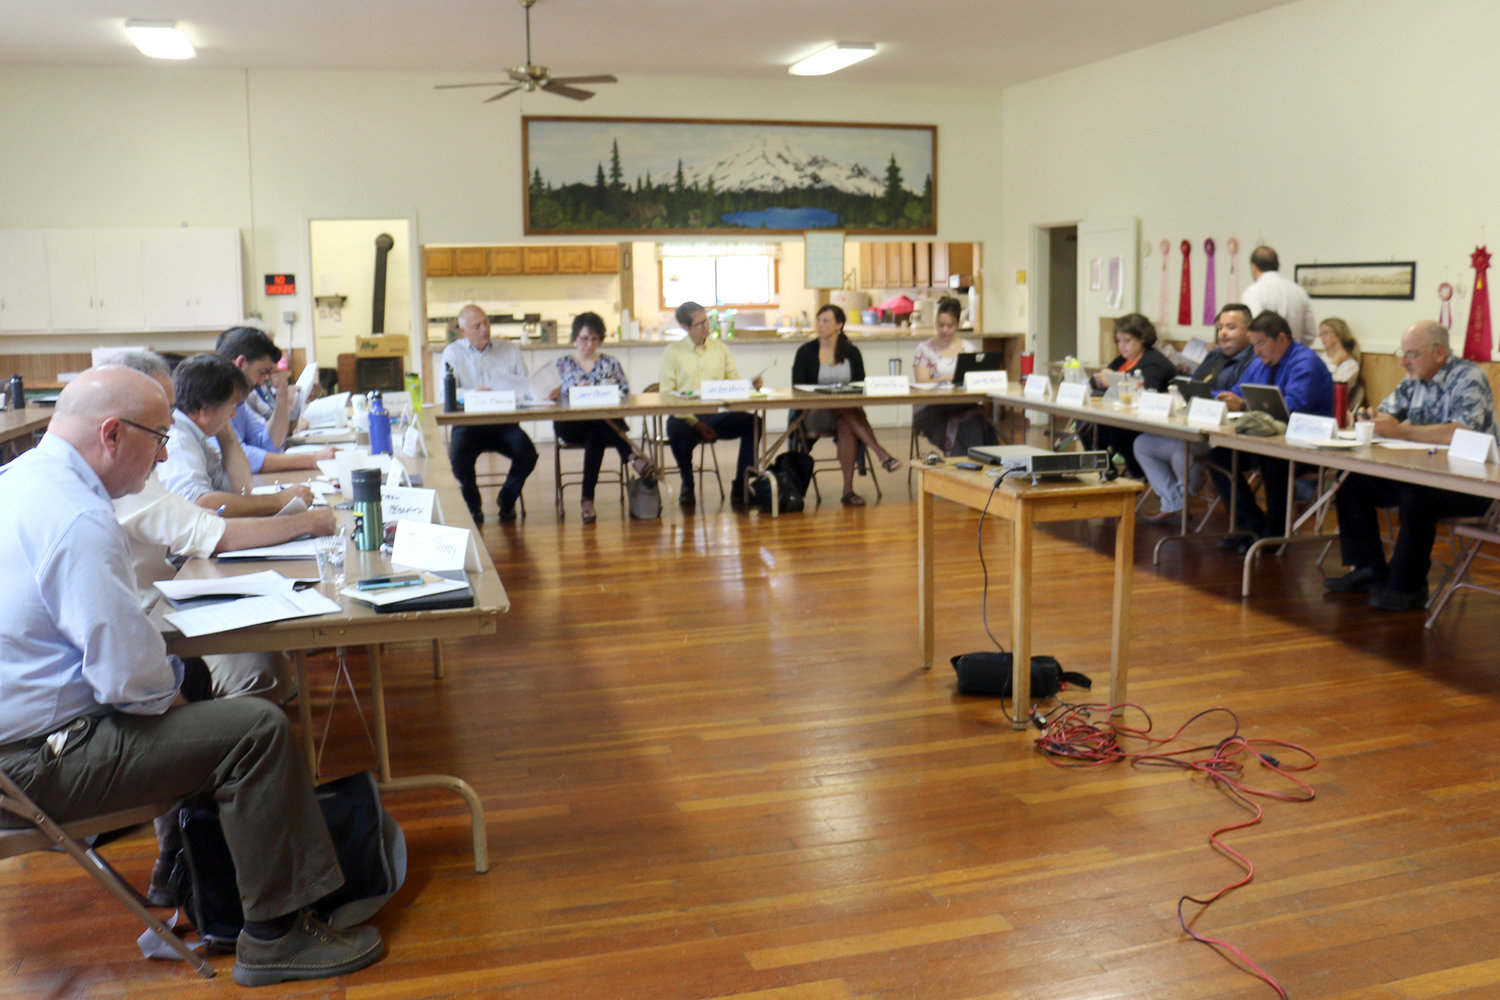 Board members of the newly established Office of the Chehalis Basin held their first meeting at the Adna Grange in this July 2017 file photo.